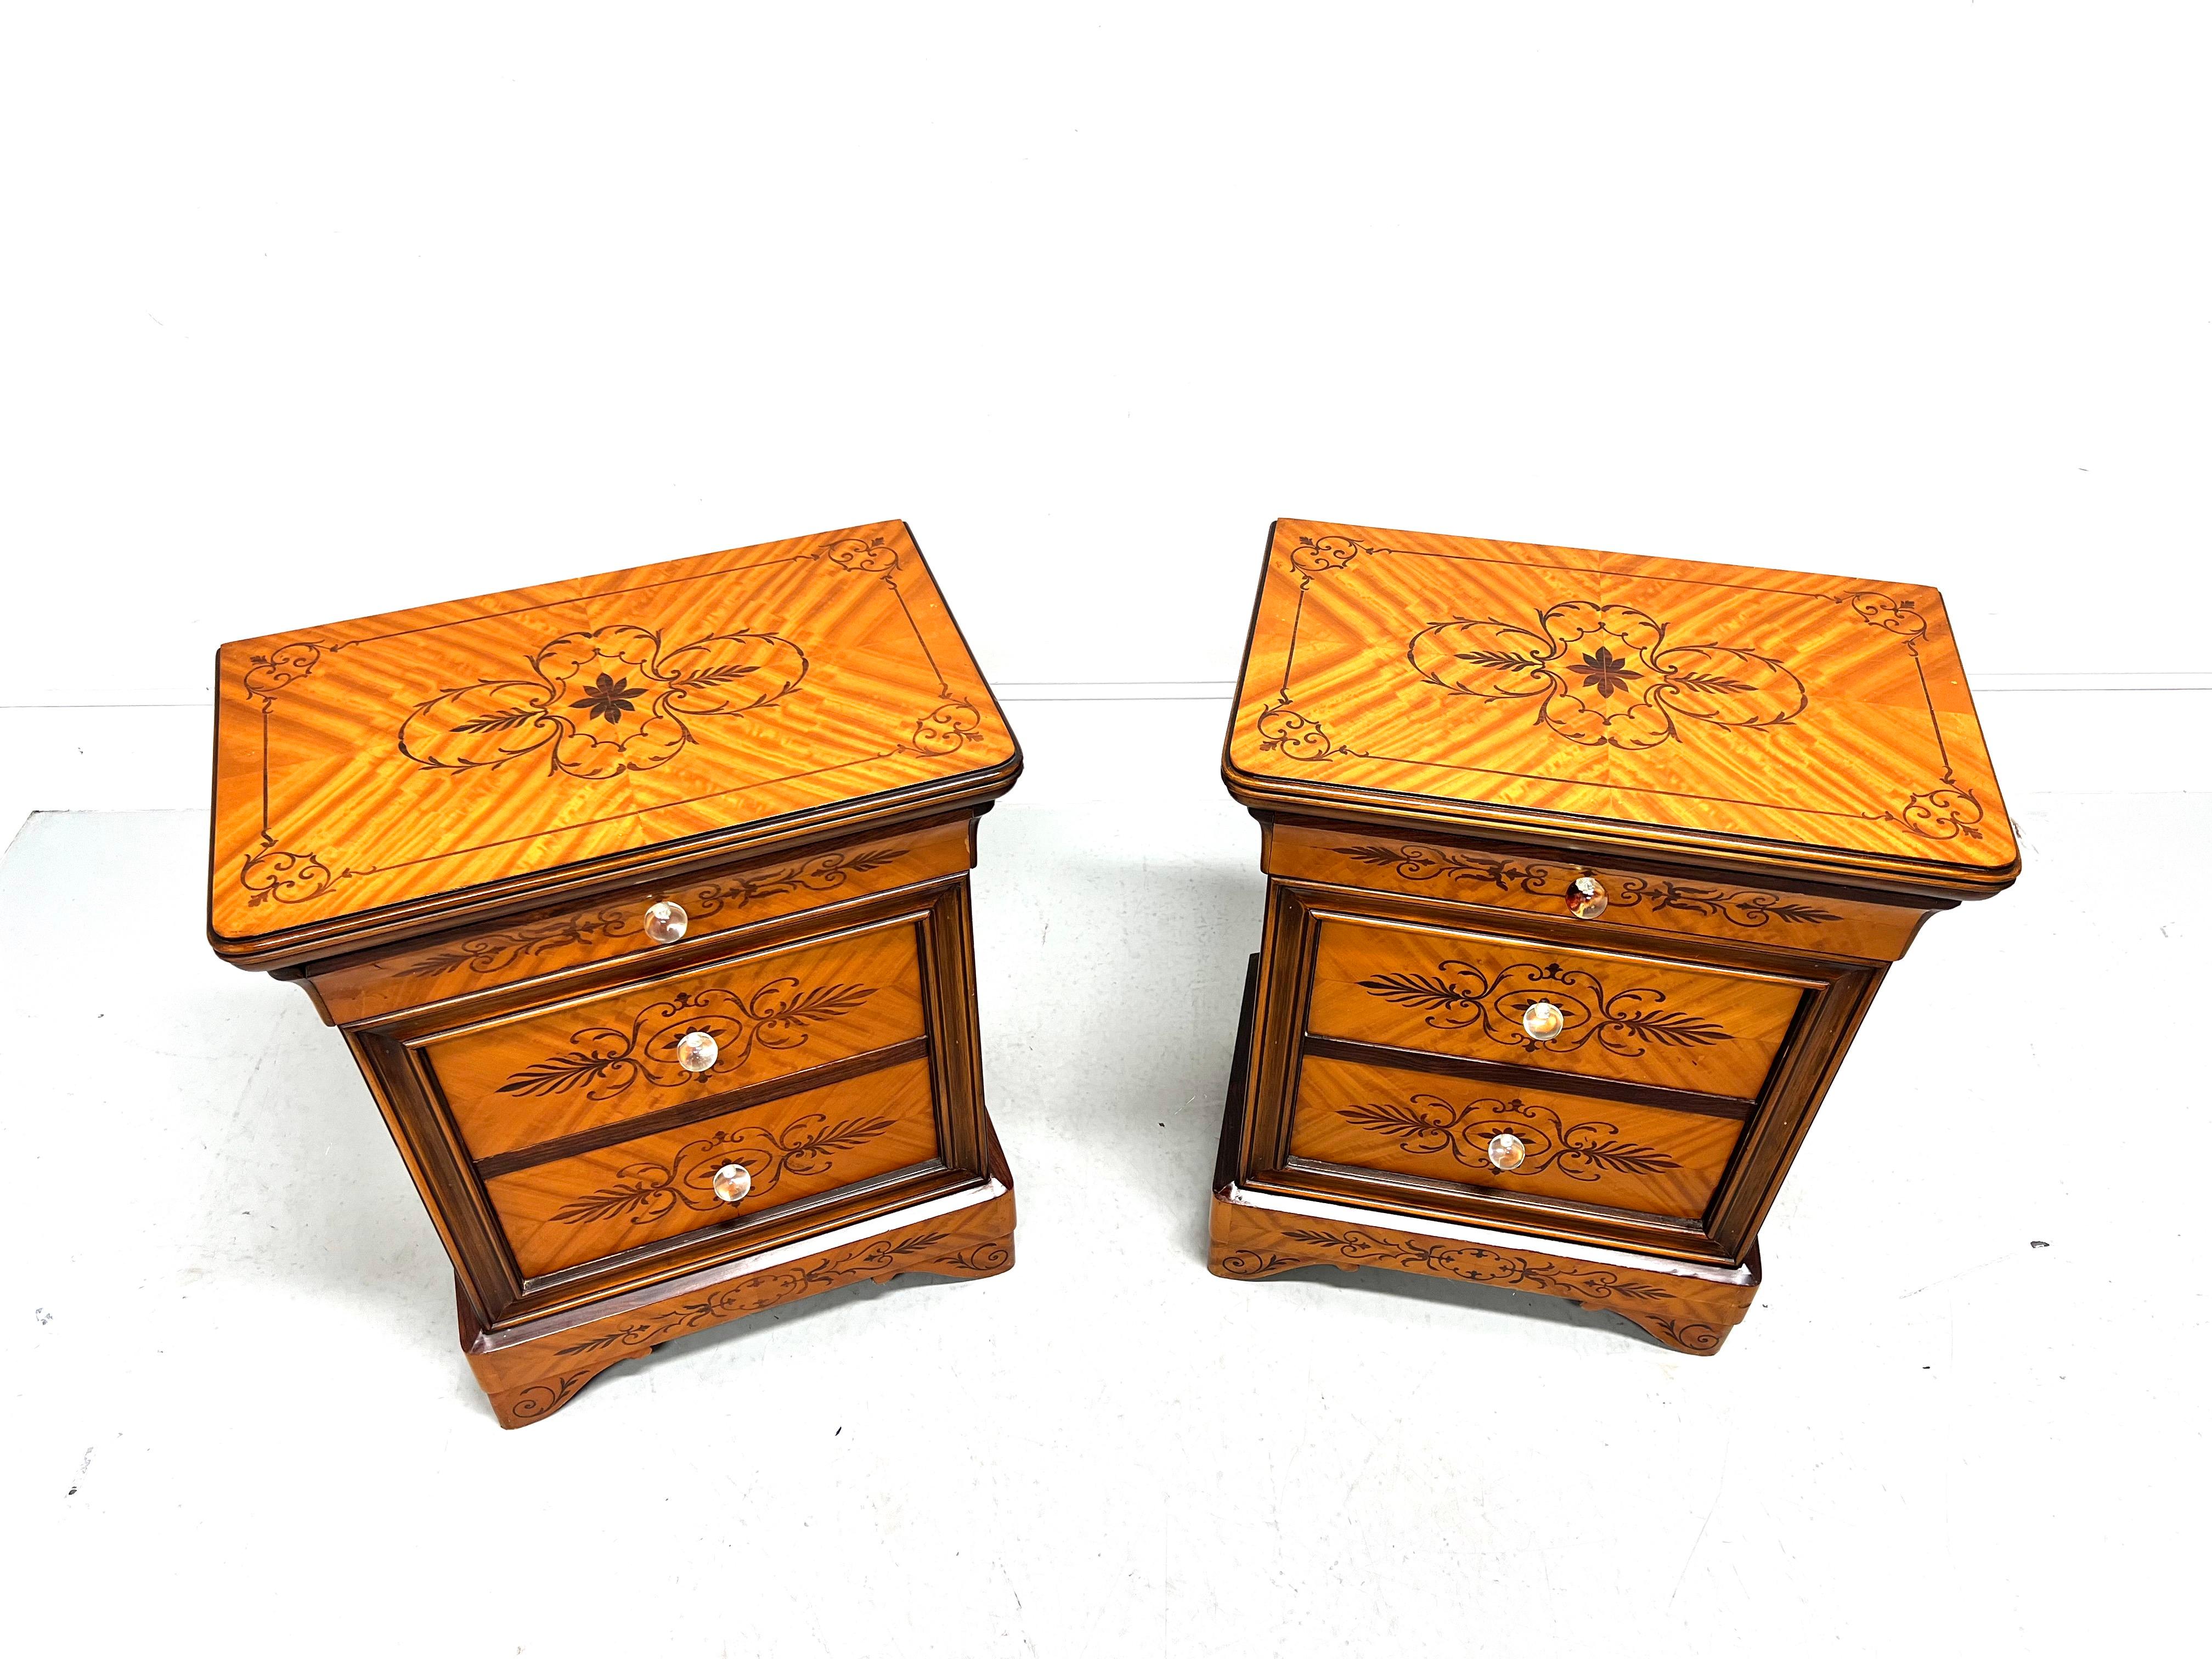 A pair of Biedermeier style nightstands, unbranded. Nutwood with decorative marquetry designs, marquetry to top with ogee edge & rounded corners, crystal knob hardware, and bracket feet. Features three drawers of dovetail construction. Likely made